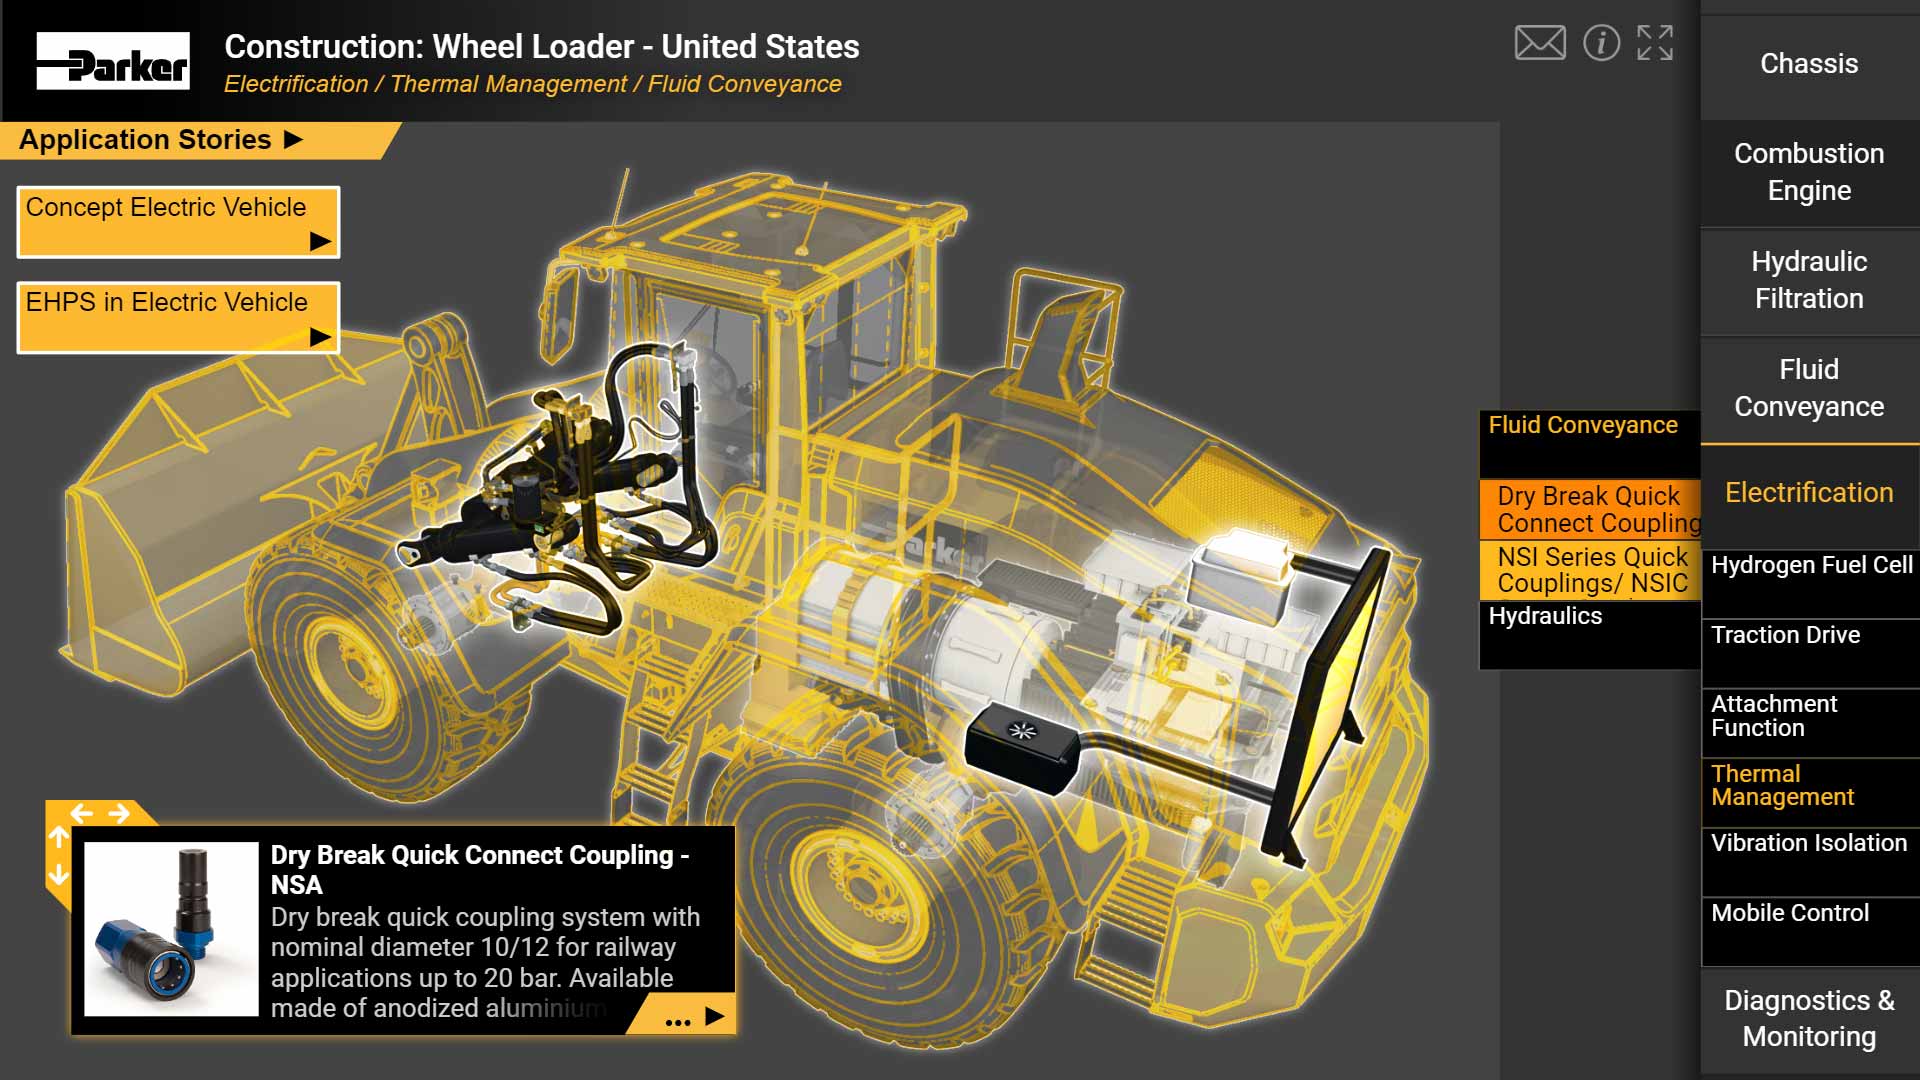 Latin America Off Road Machinery - Wheel Loader Equipment and Products Industrial OEM Equipment Manufacturer